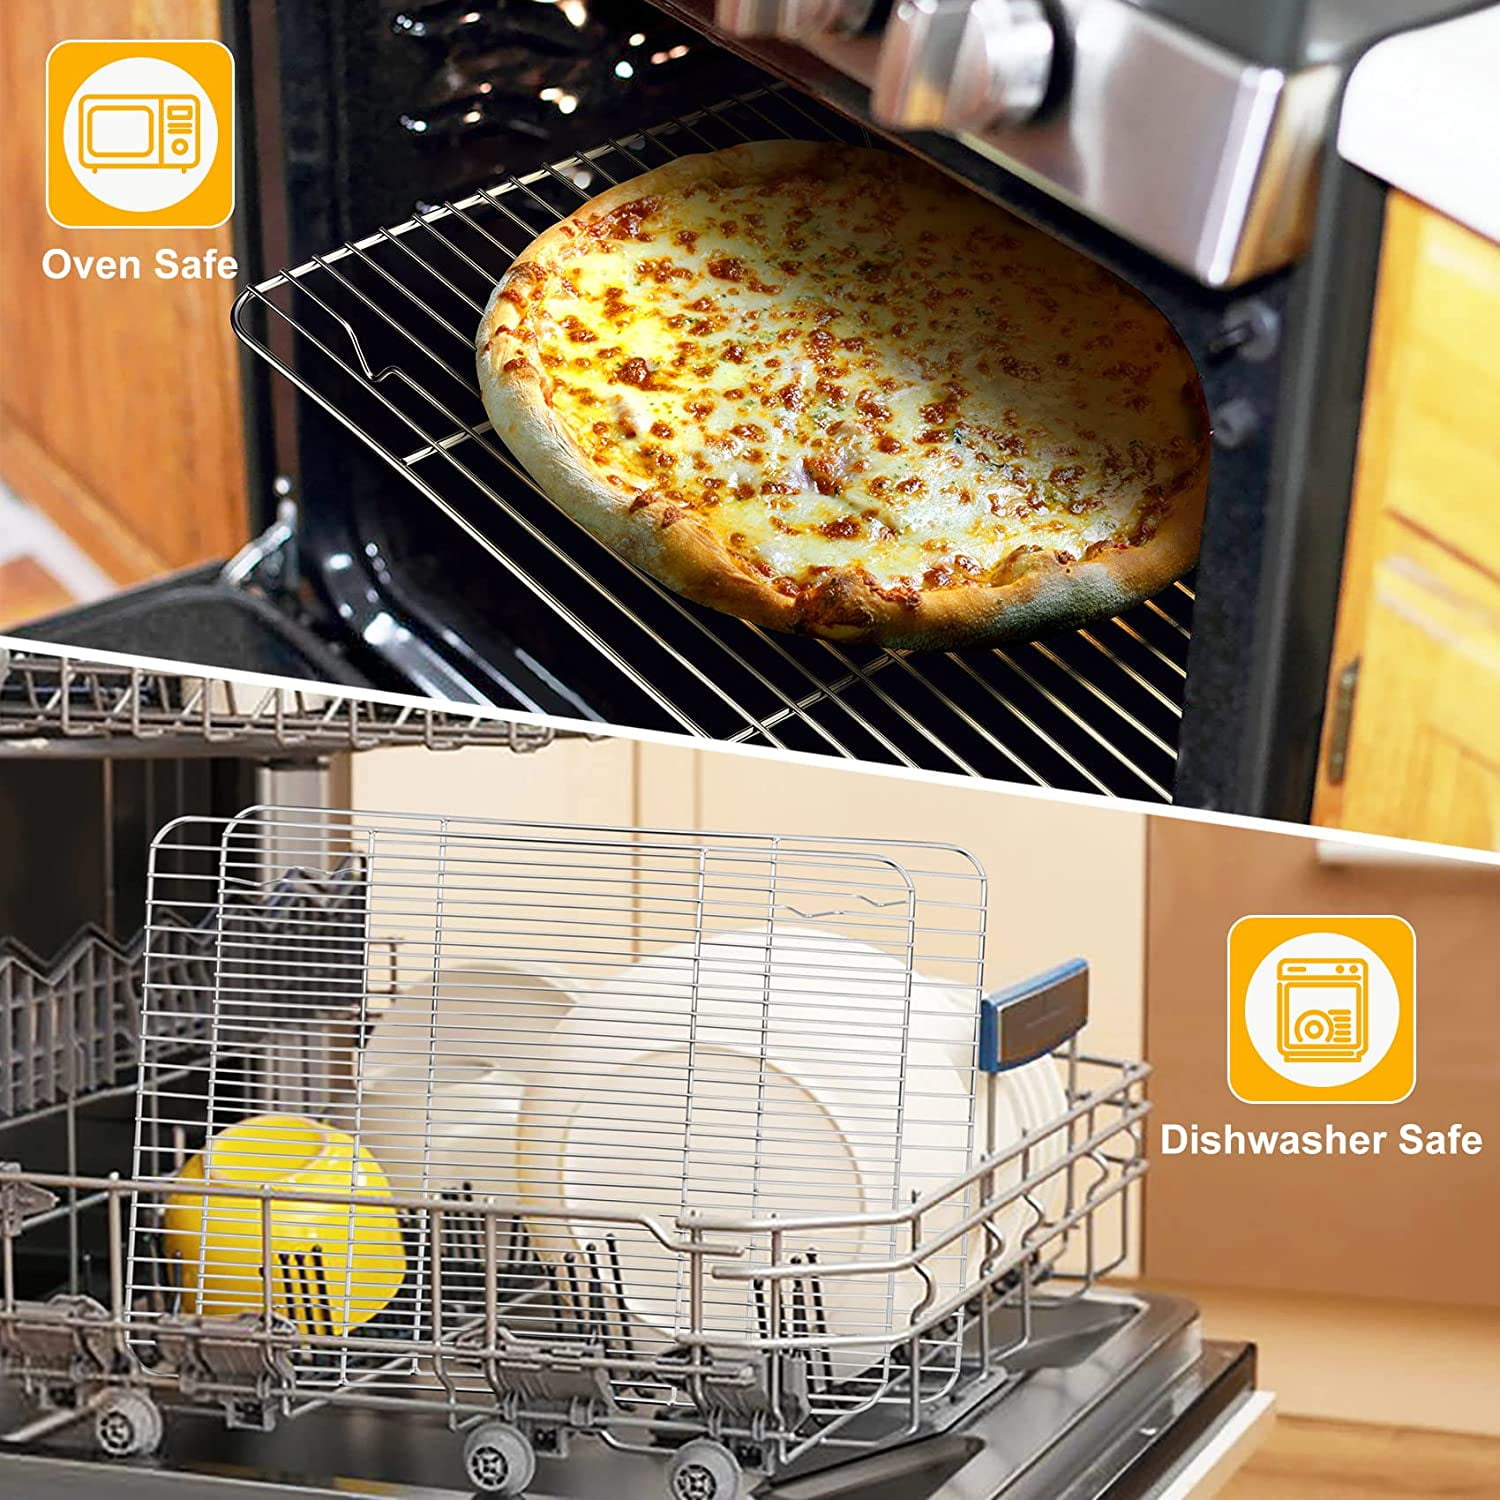 Cooling Rack Set for Baking Cooking Roasting Oven Use, Cribun 2-Piece  Stainless Steel Grill Racks, Fit Small Cookie Sheets - Oven & Dishwasher  Safe ,Rectangle 15.3*11.3*0.6 